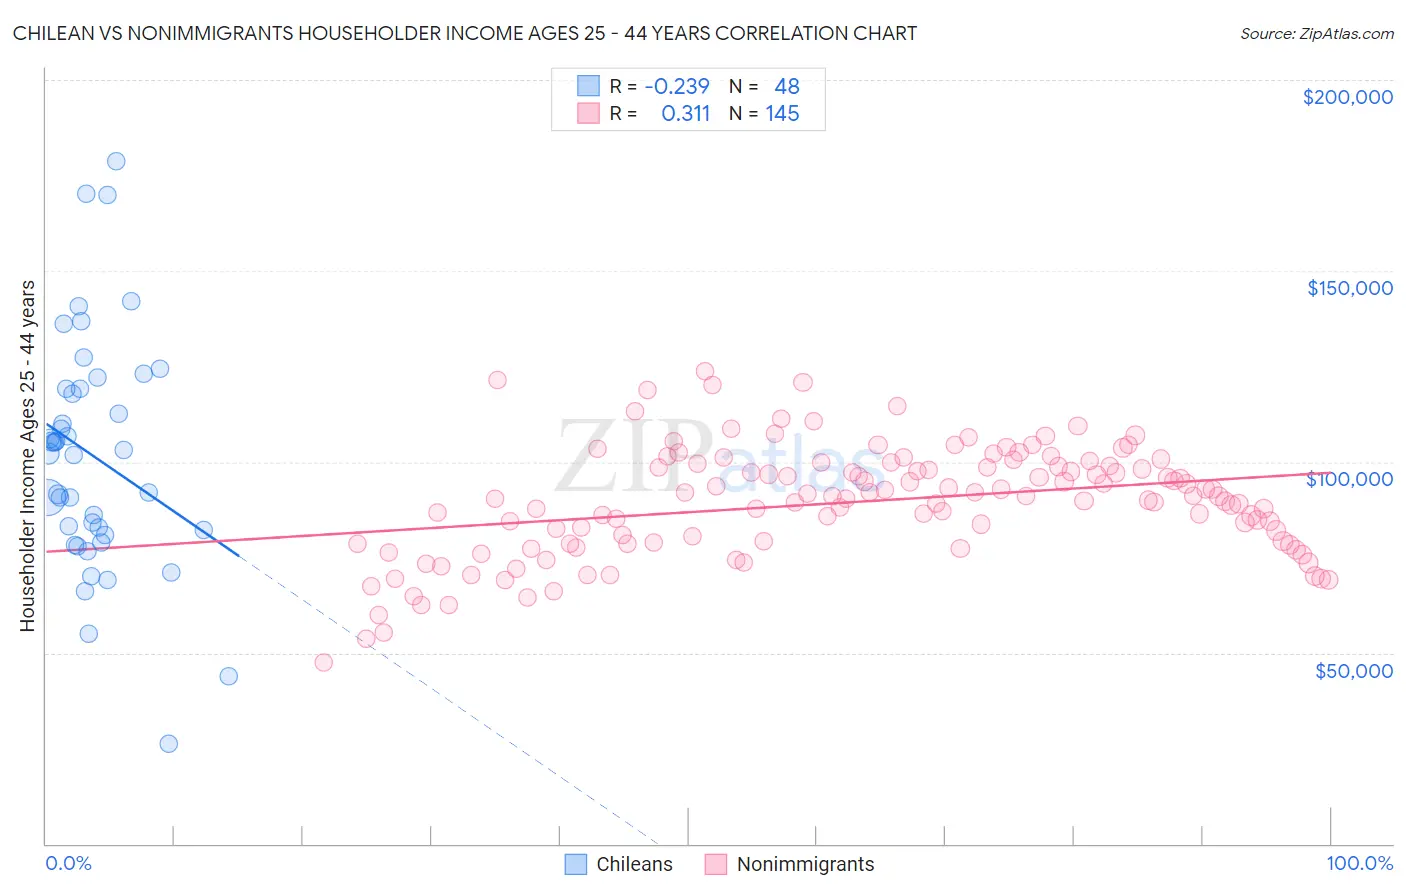 Chilean vs Nonimmigrants Householder Income Ages 25 - 44 years